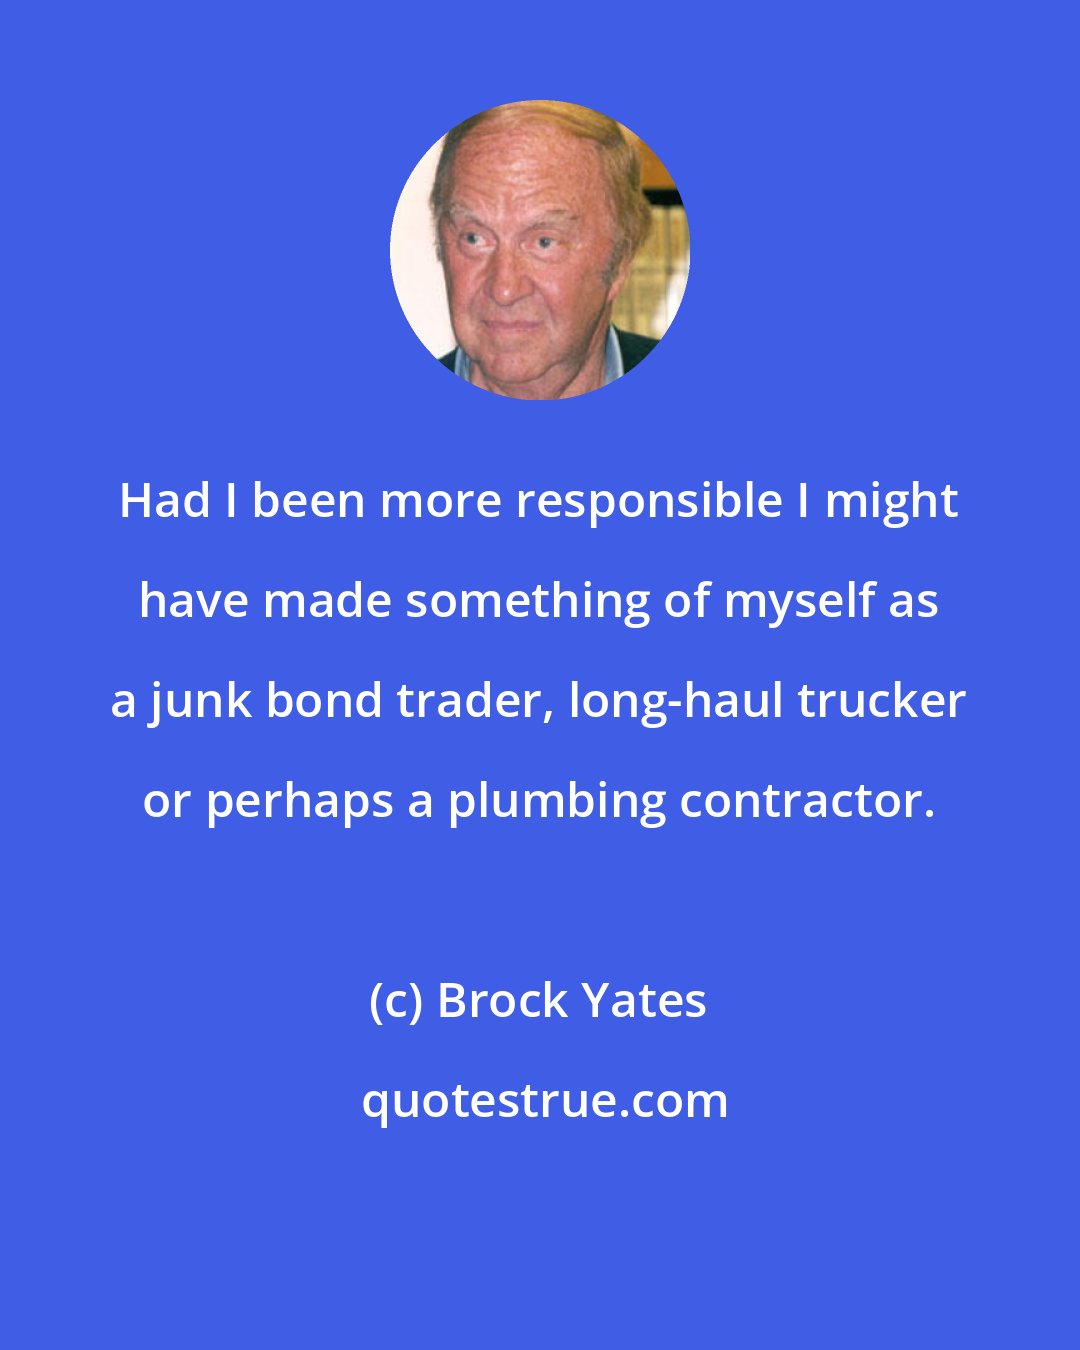 Brock Yates: Had I been more responsible I might have made something of myself as a junk bond trader, long-haul trucker or perhaps a plumbing contractor.